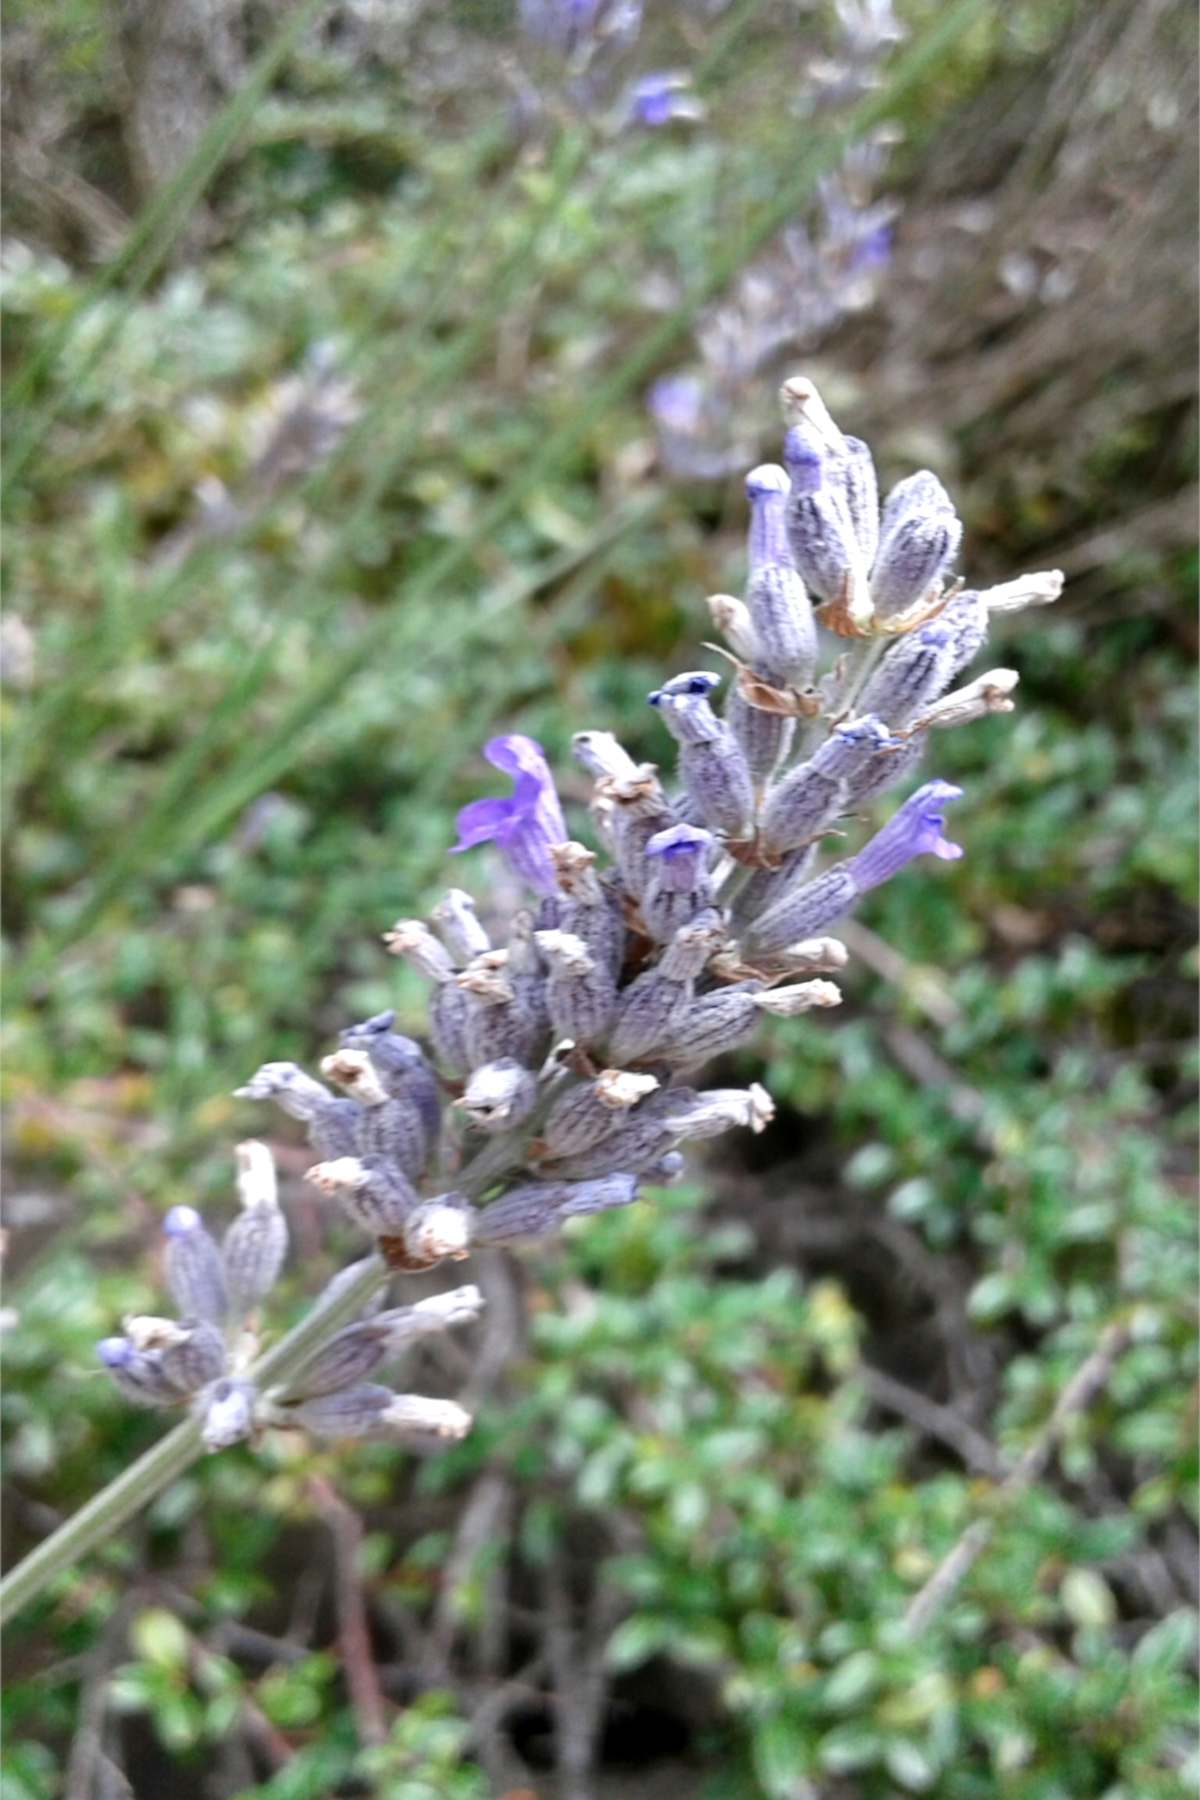 A full panicle of spike lavender flowers close-up, slightly dried.